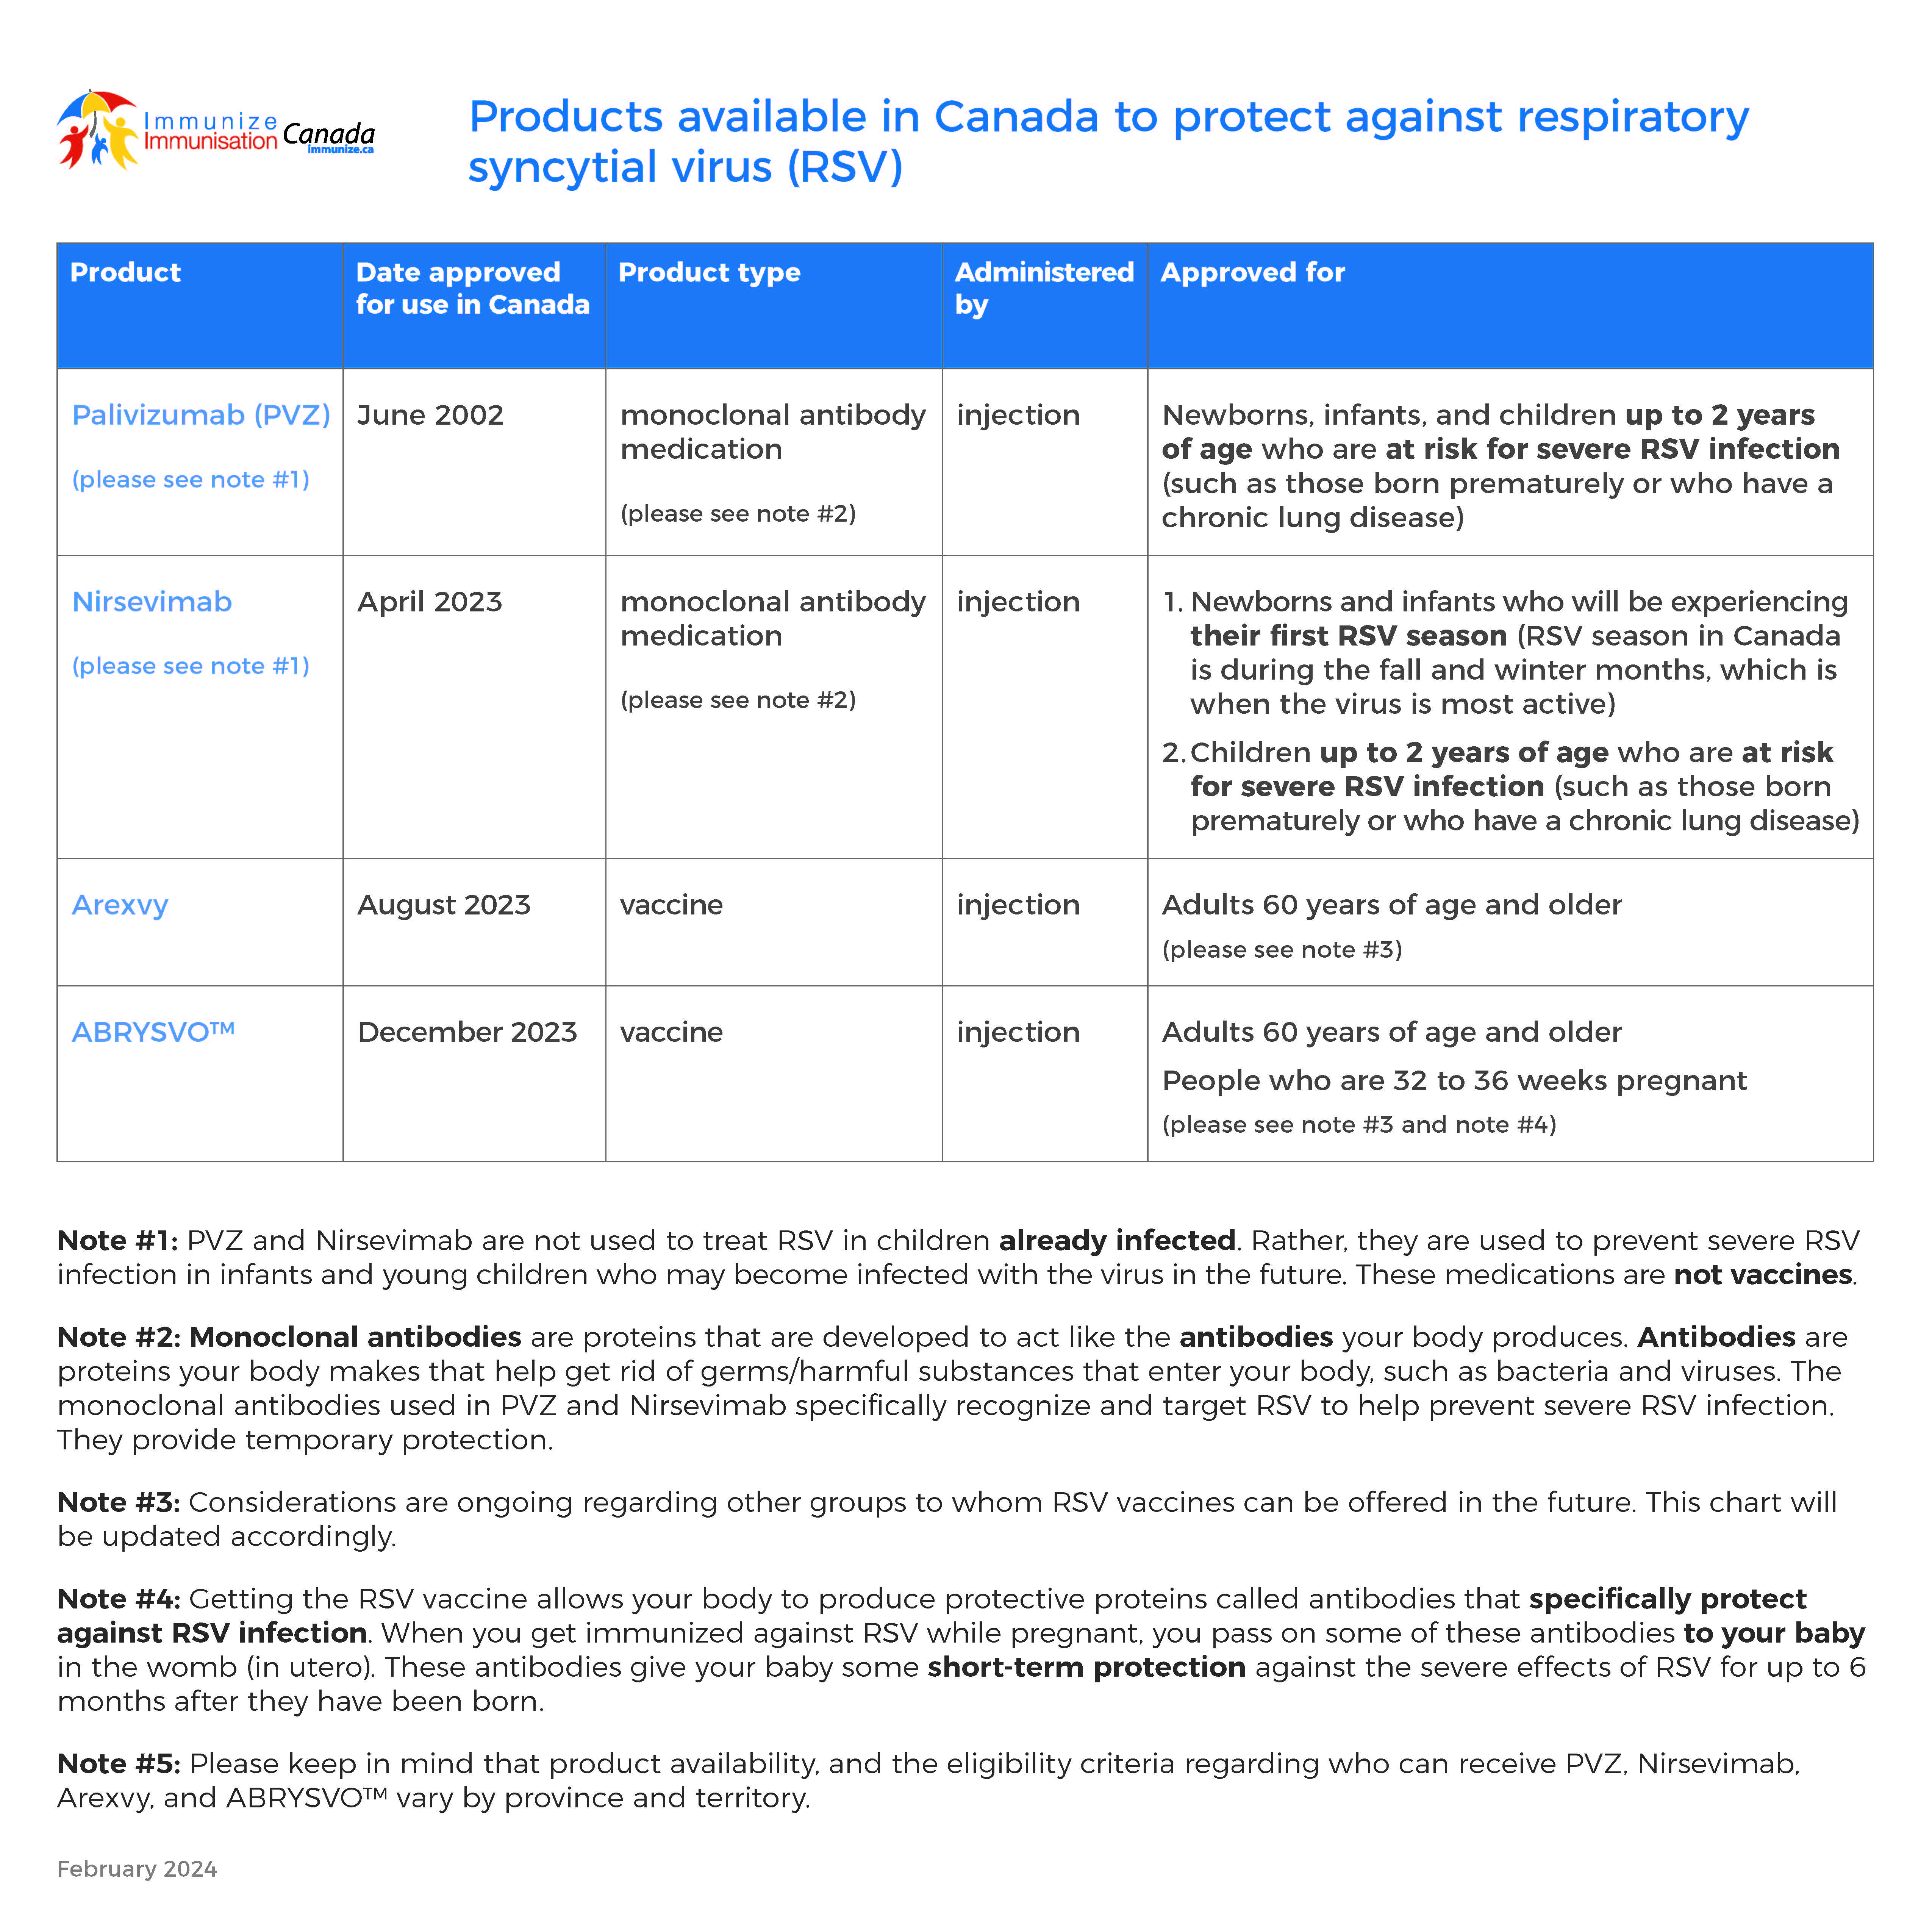 Products available in Canada to protect against respiratory syncytial virus (RSV)